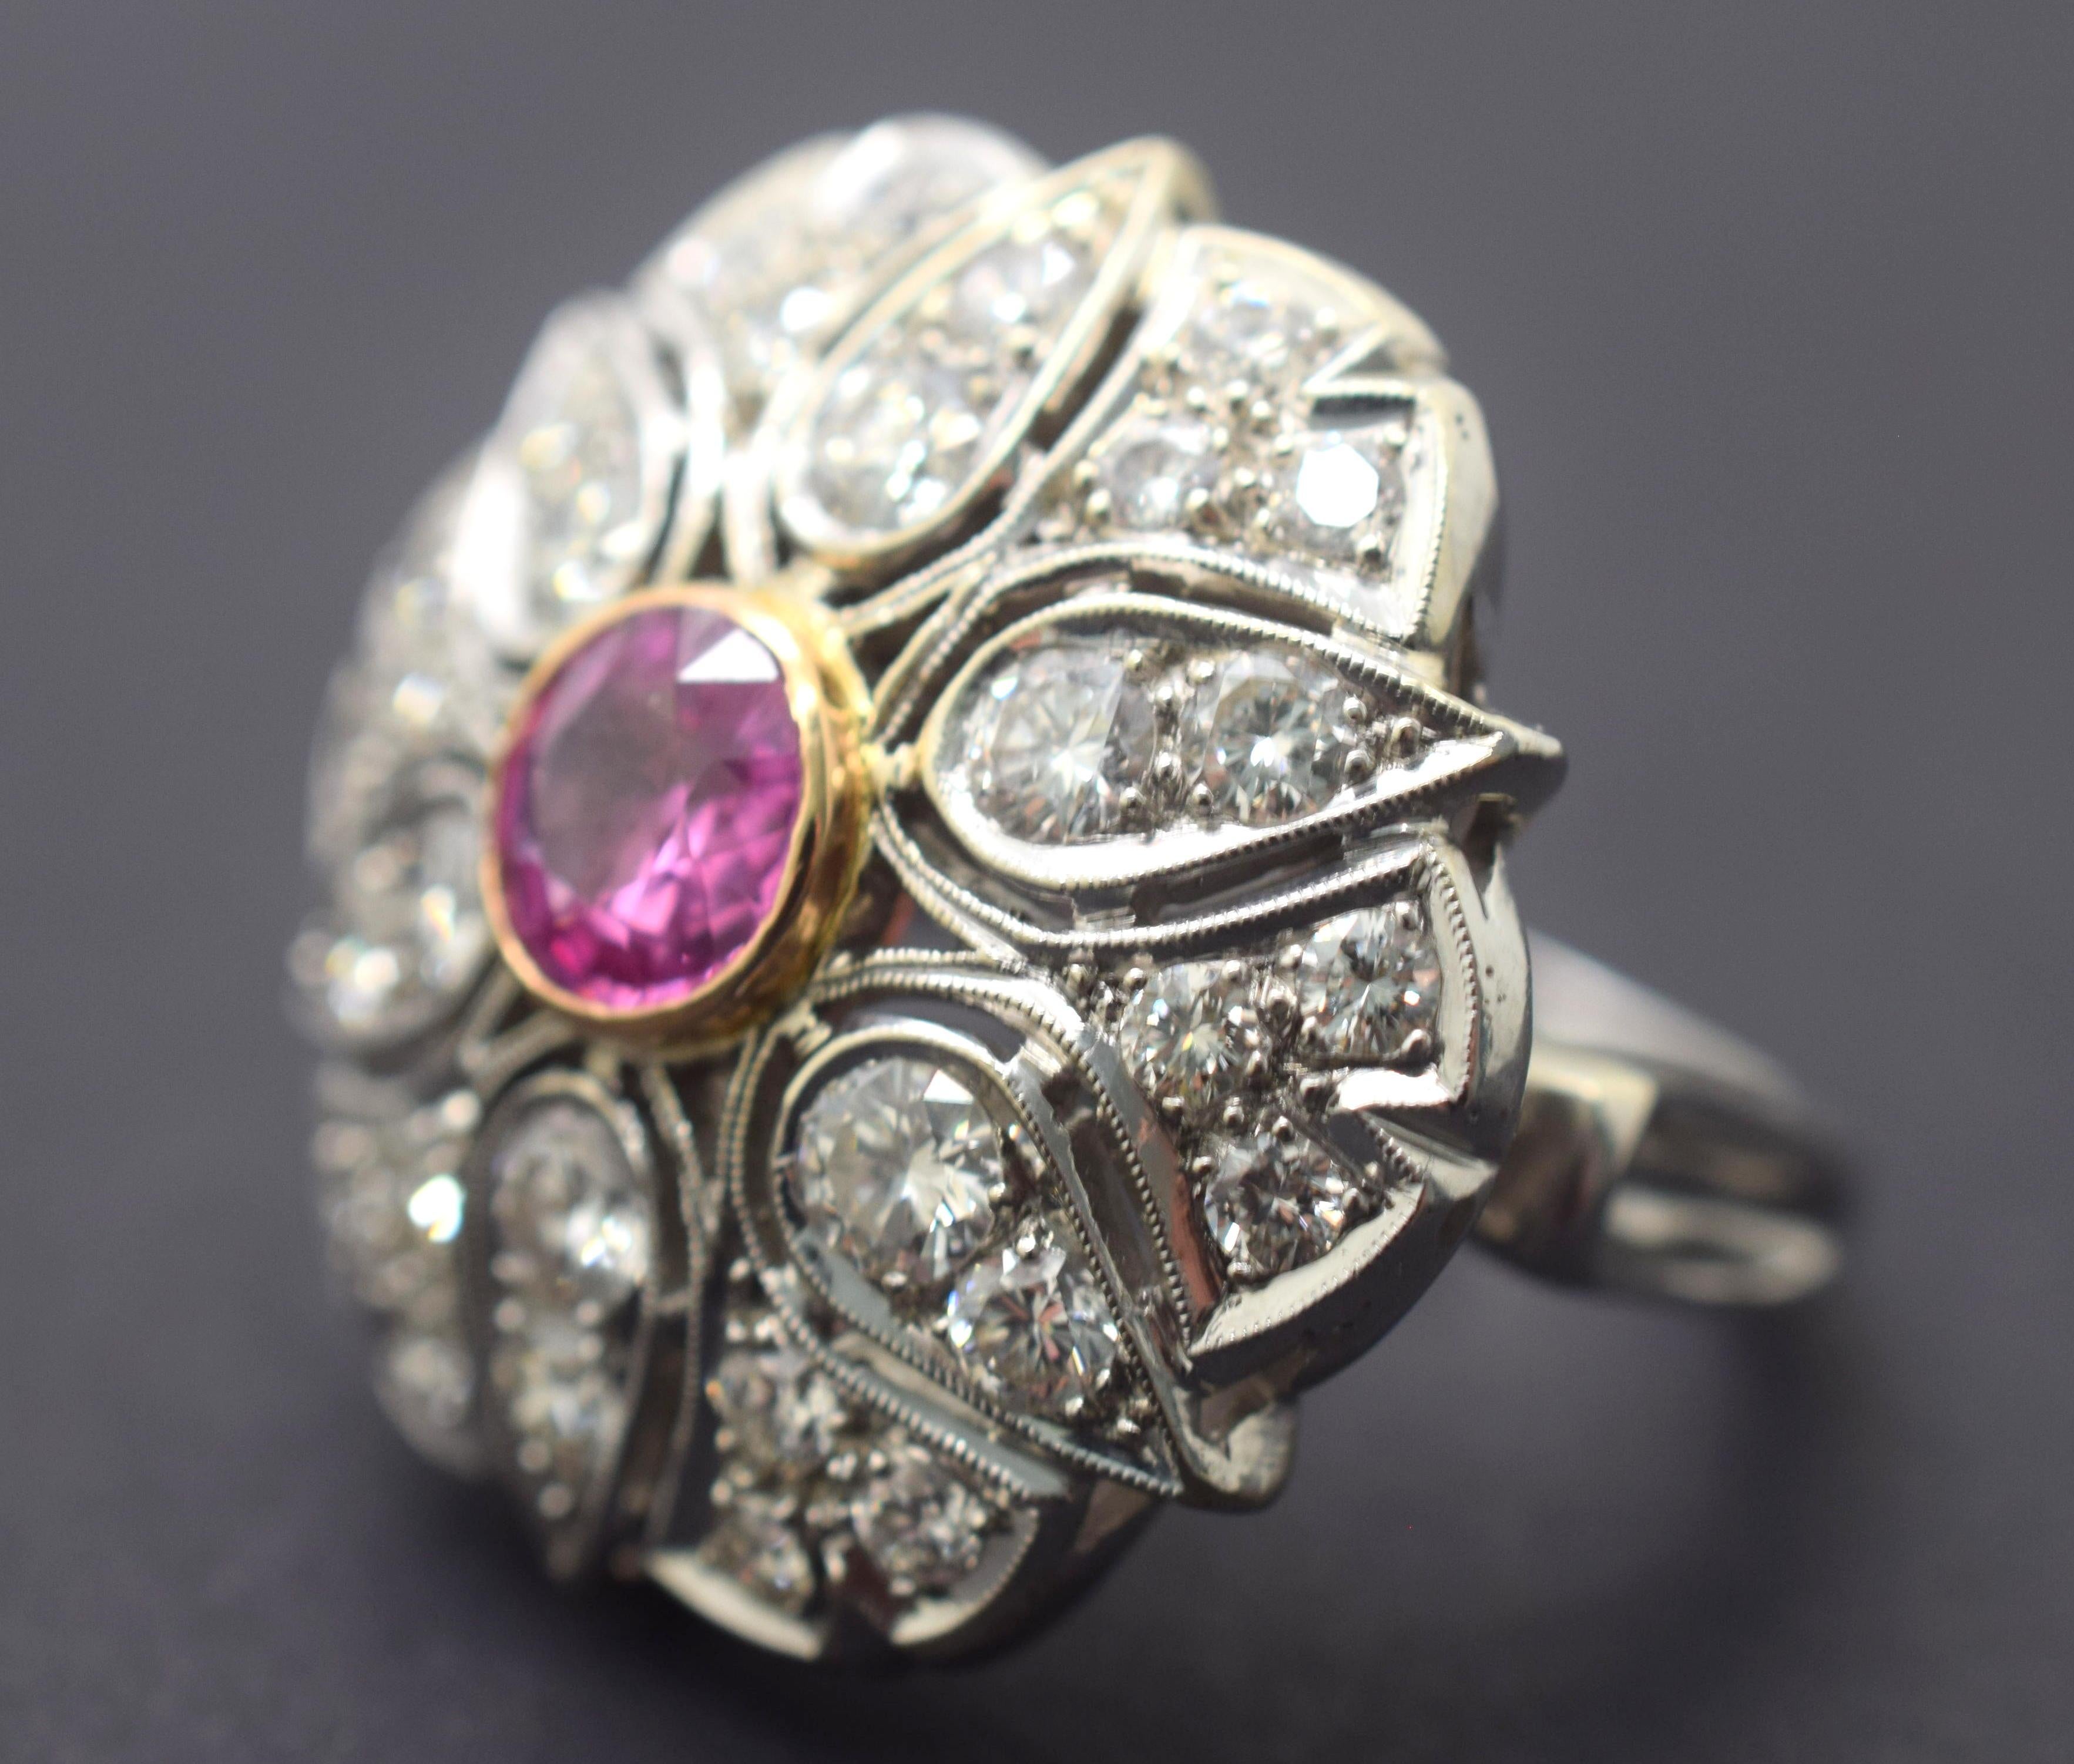 Gorgeous pink color in this natural no heat Pink Sapphire. Stone weighs 1.67 ct and is a brilliant round cut Sapphire.  Sapphire is bezel set and surrounded with Diamonds on the head of this ring. The ring shows a star pattern with thirty individual